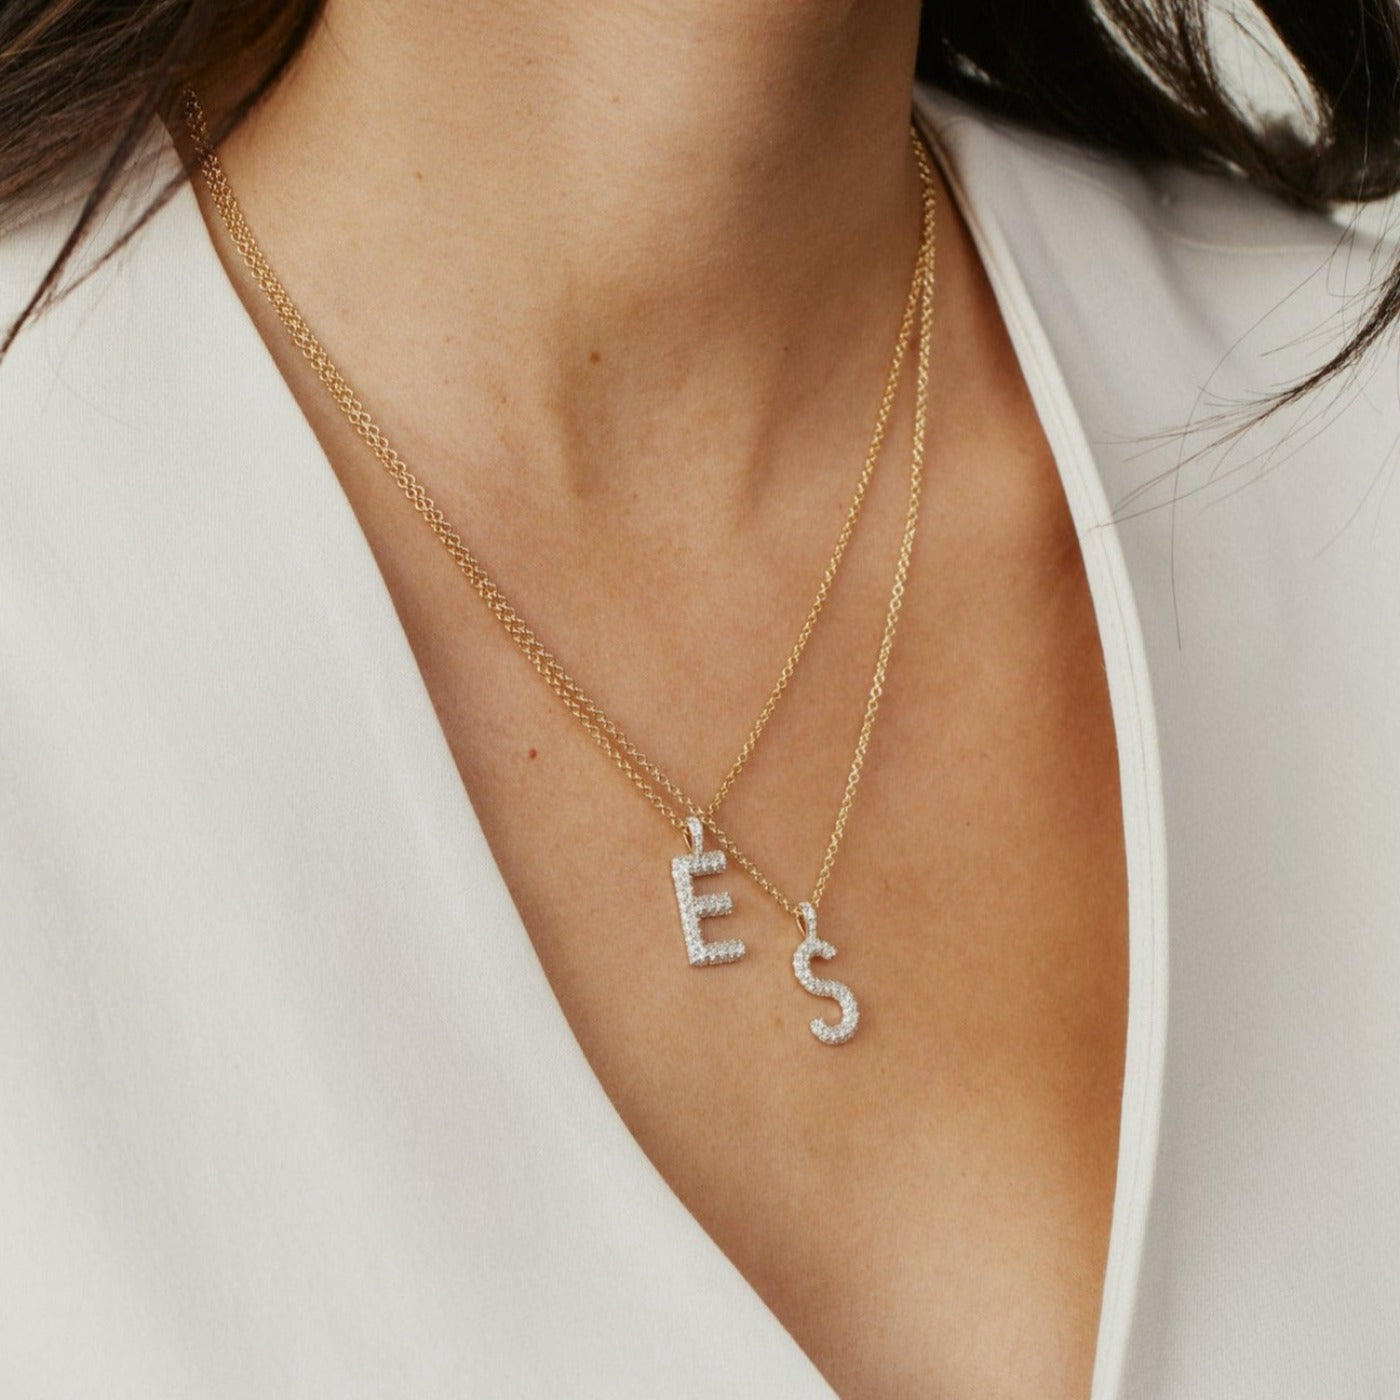 Initial Necklace, Letter V Diamond Pendant with 18k Yellow Gold Chain